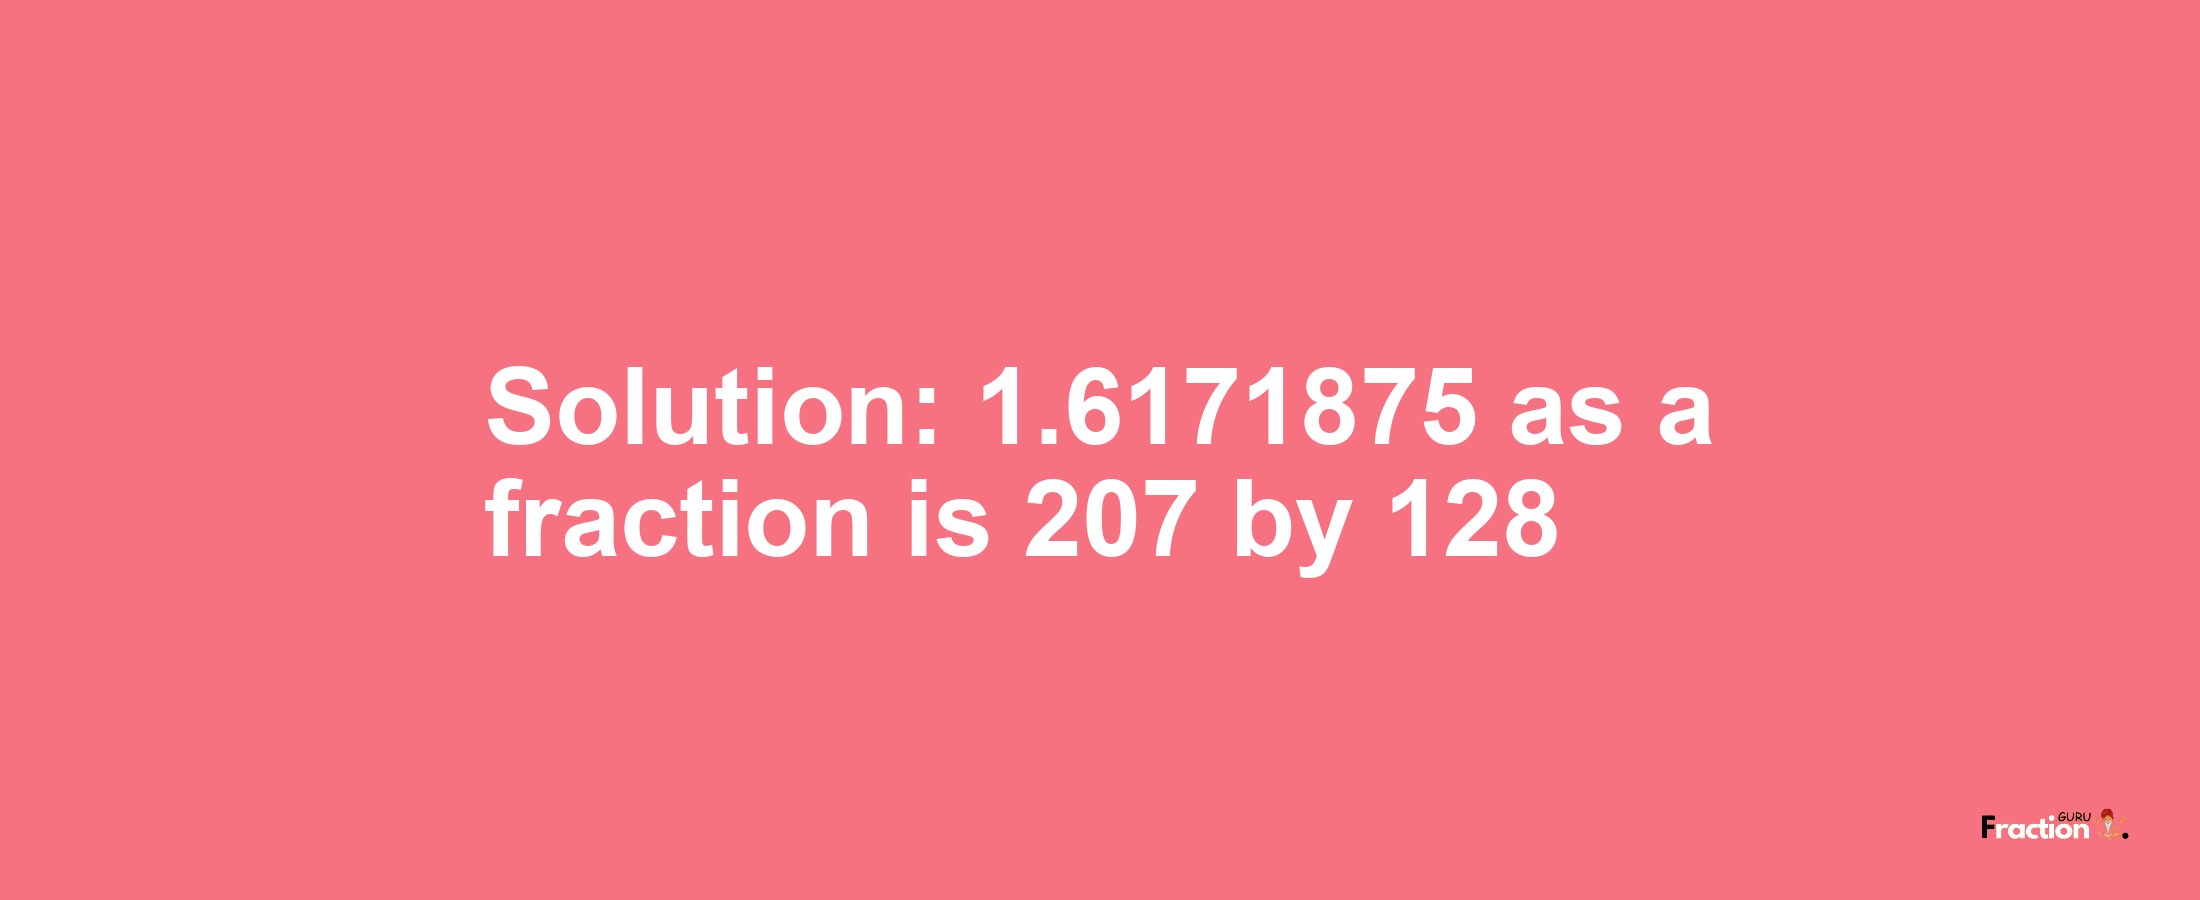 Solution:1.6171875 as a fraction is 207/128